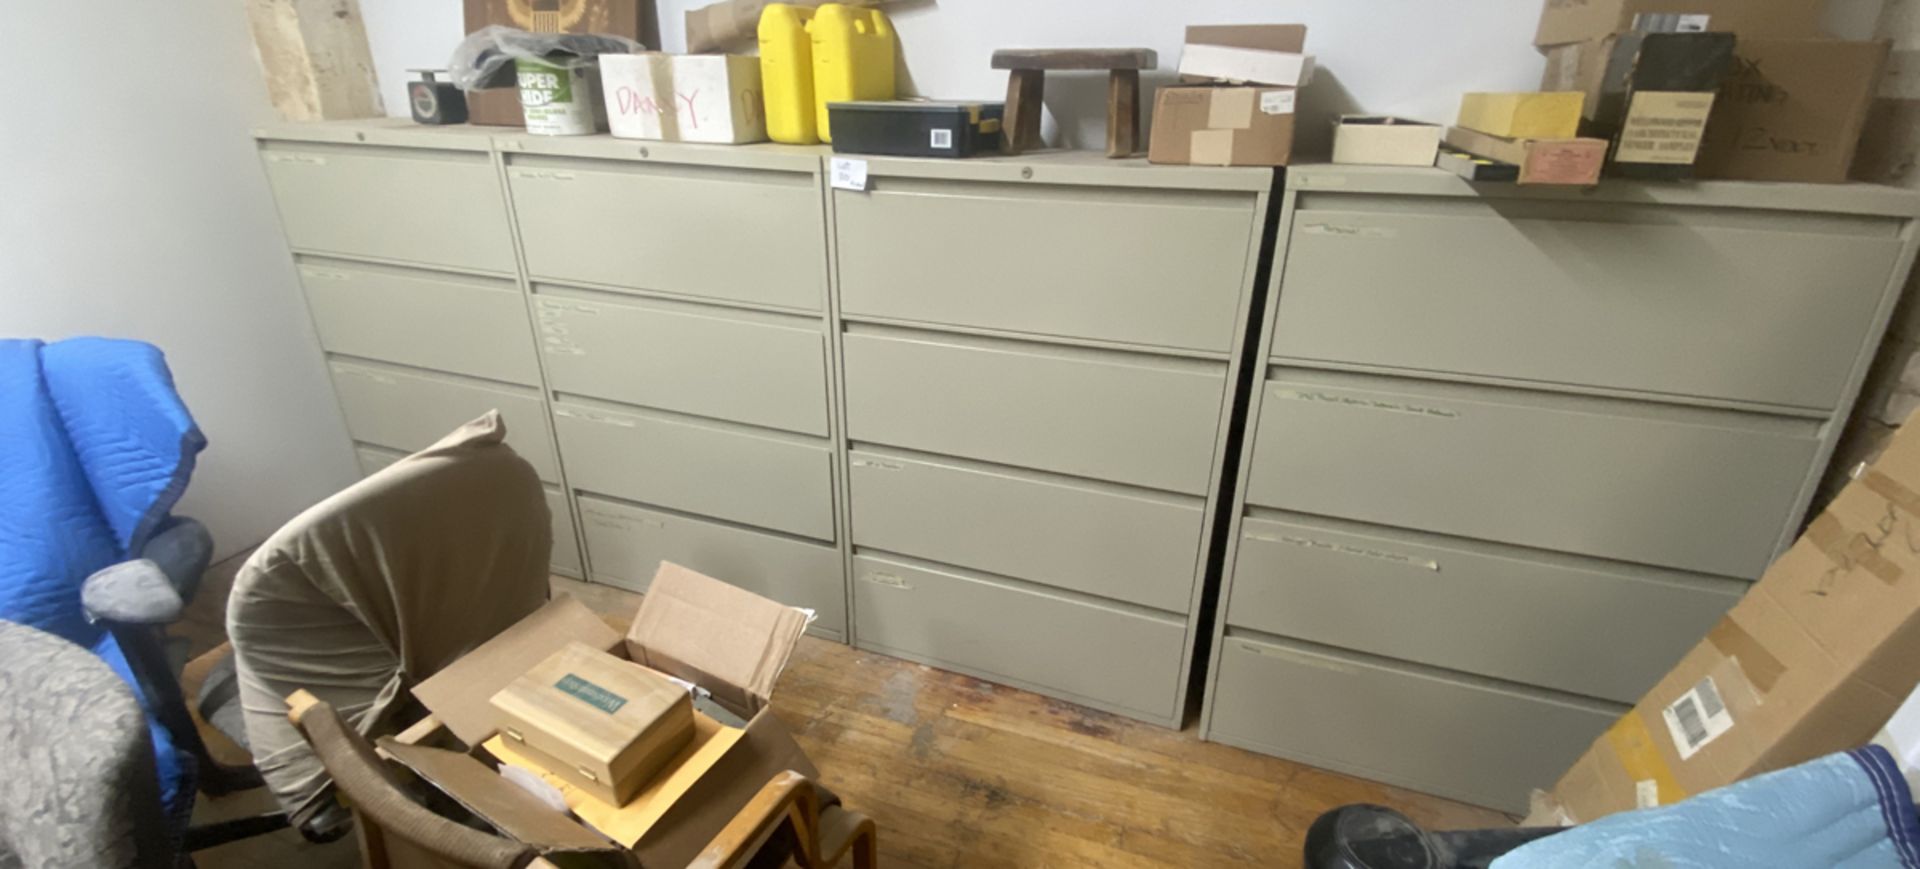 {each} File Cabinets